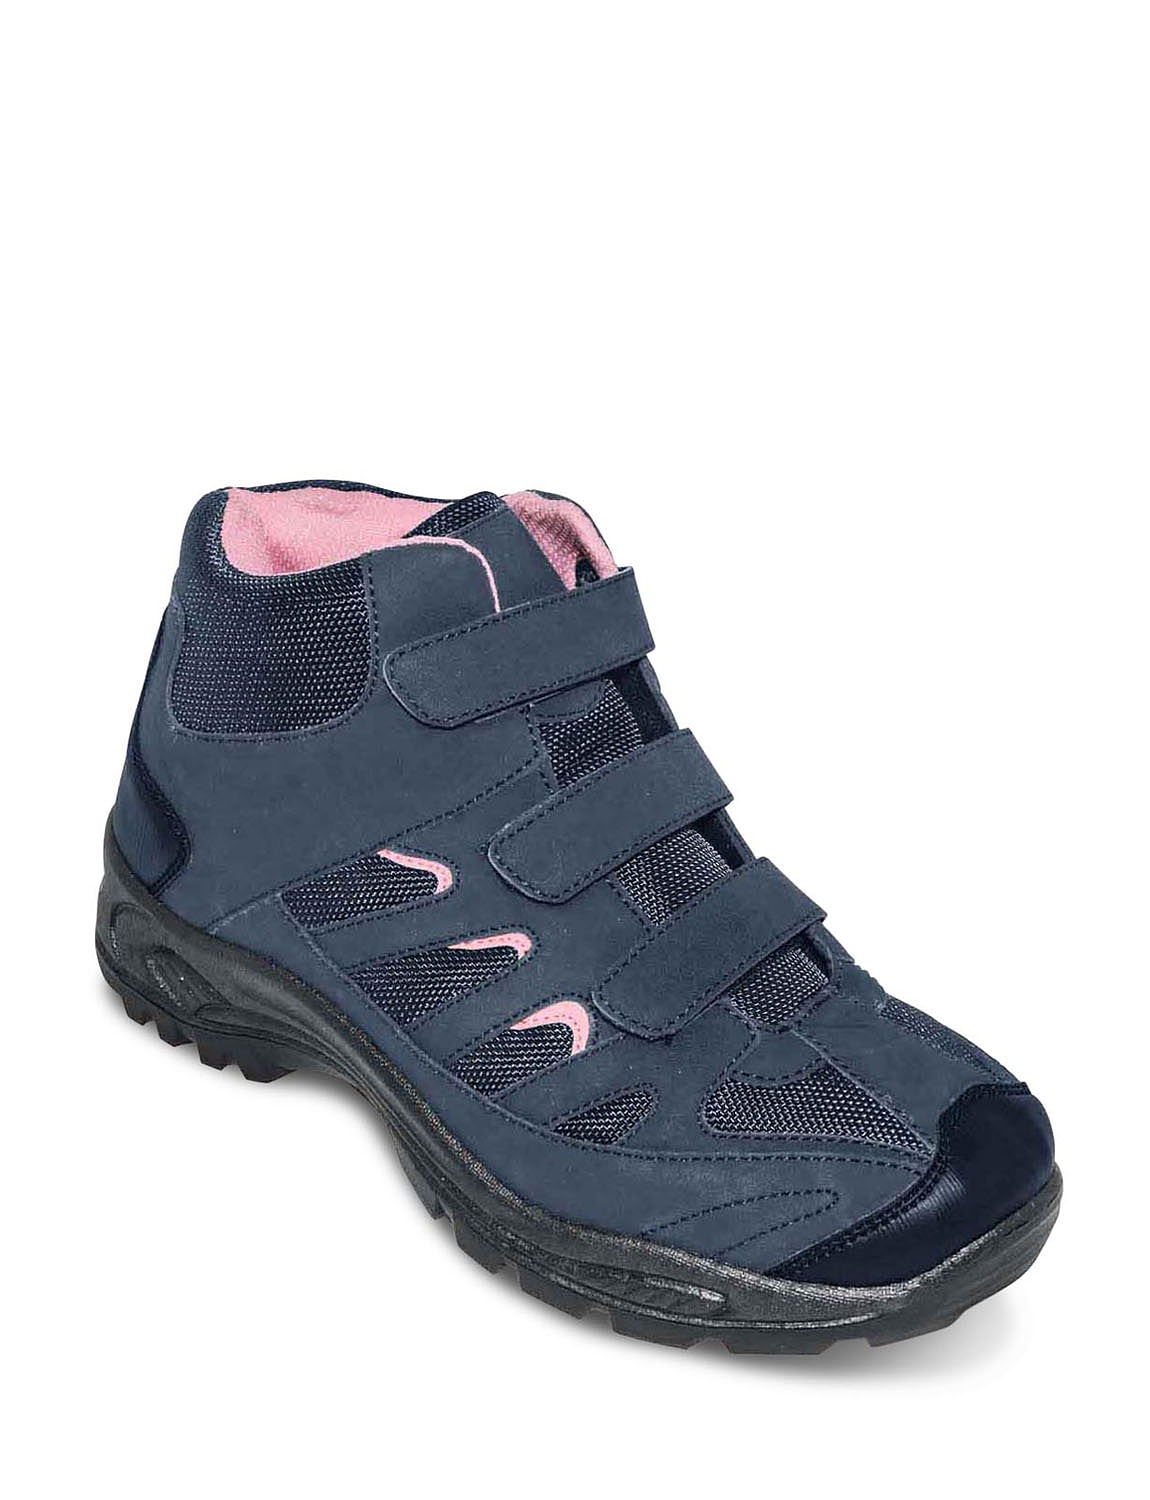 Ladies Wide Fit Hiker Boot | Chums